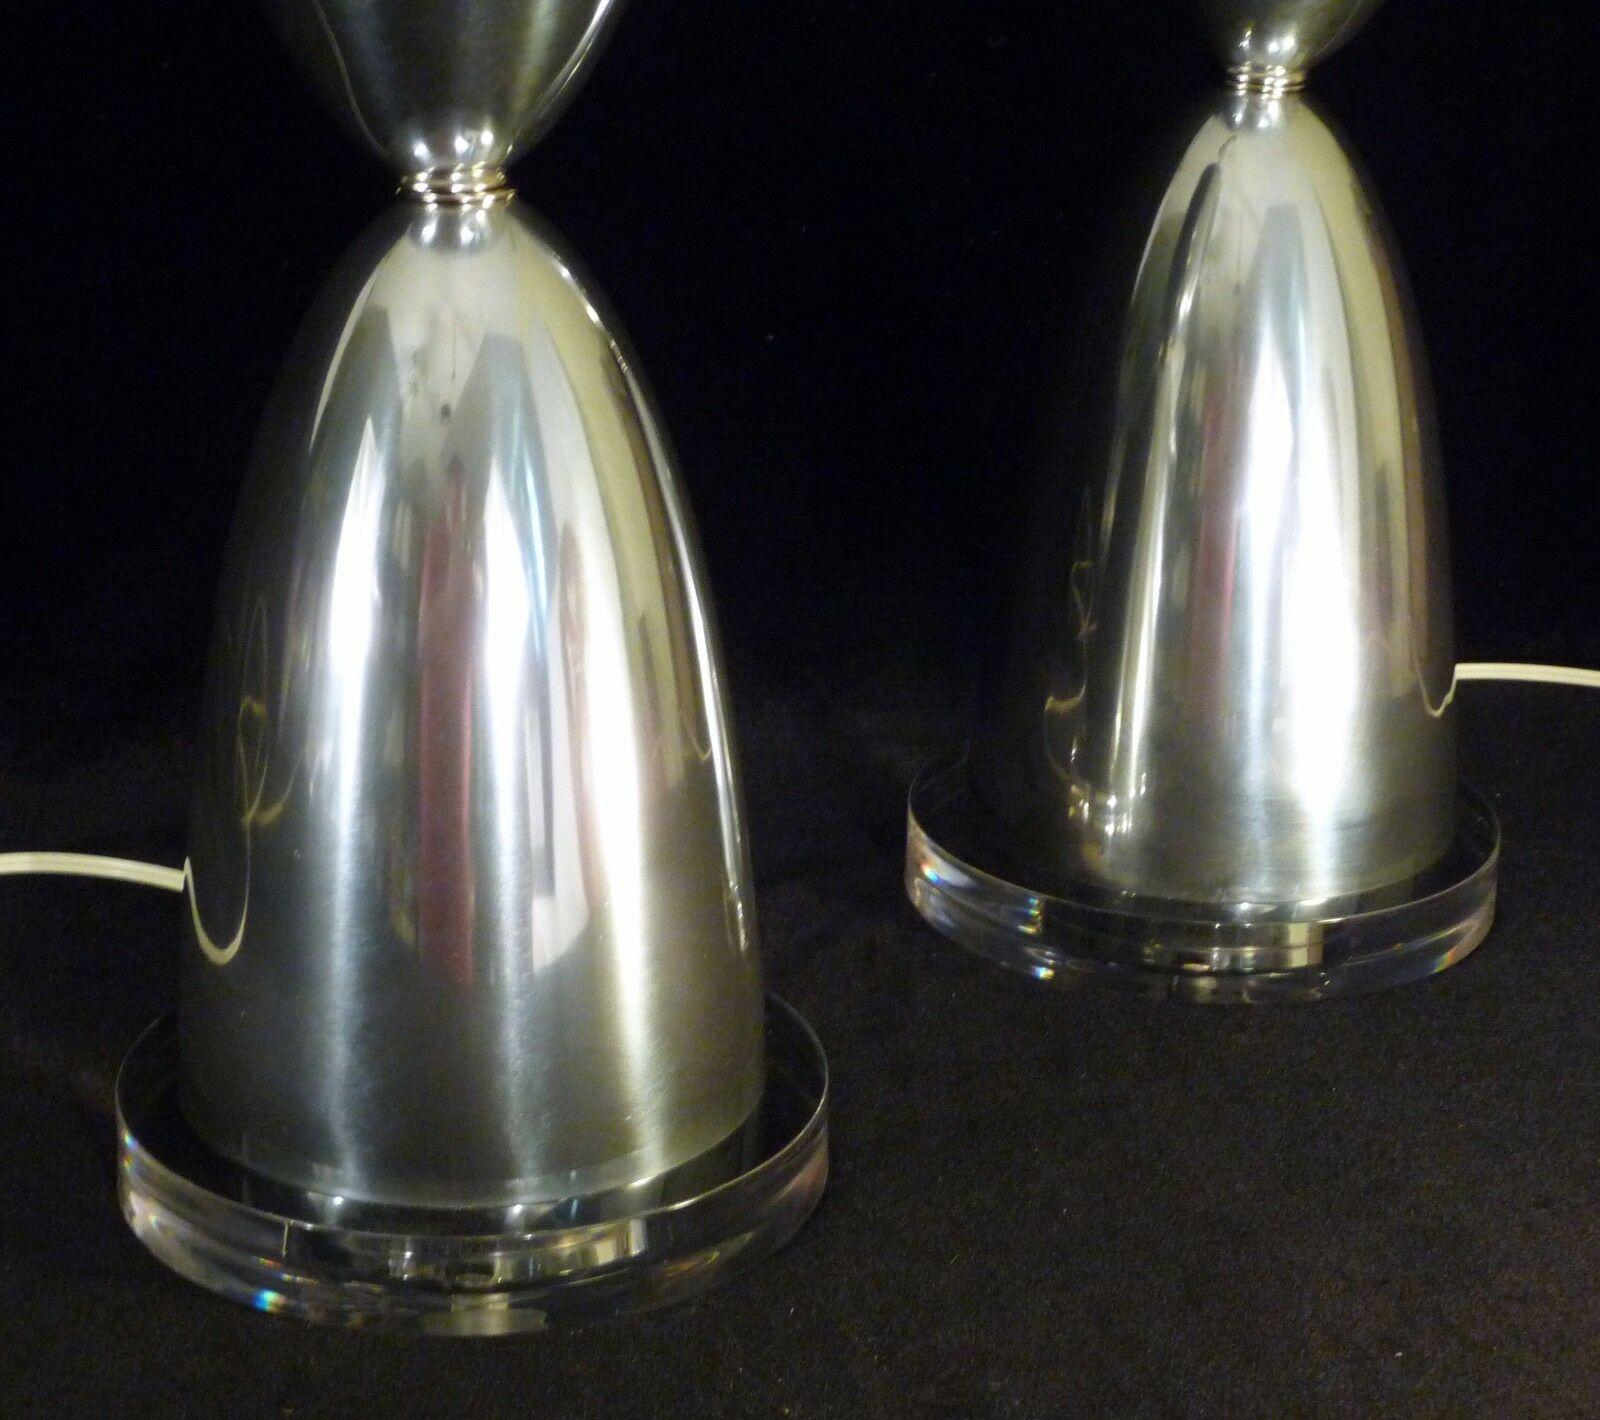 20th Century Pair of Mid-Century Modern Polished Aluminum & Lucite Architectural Table Lamps